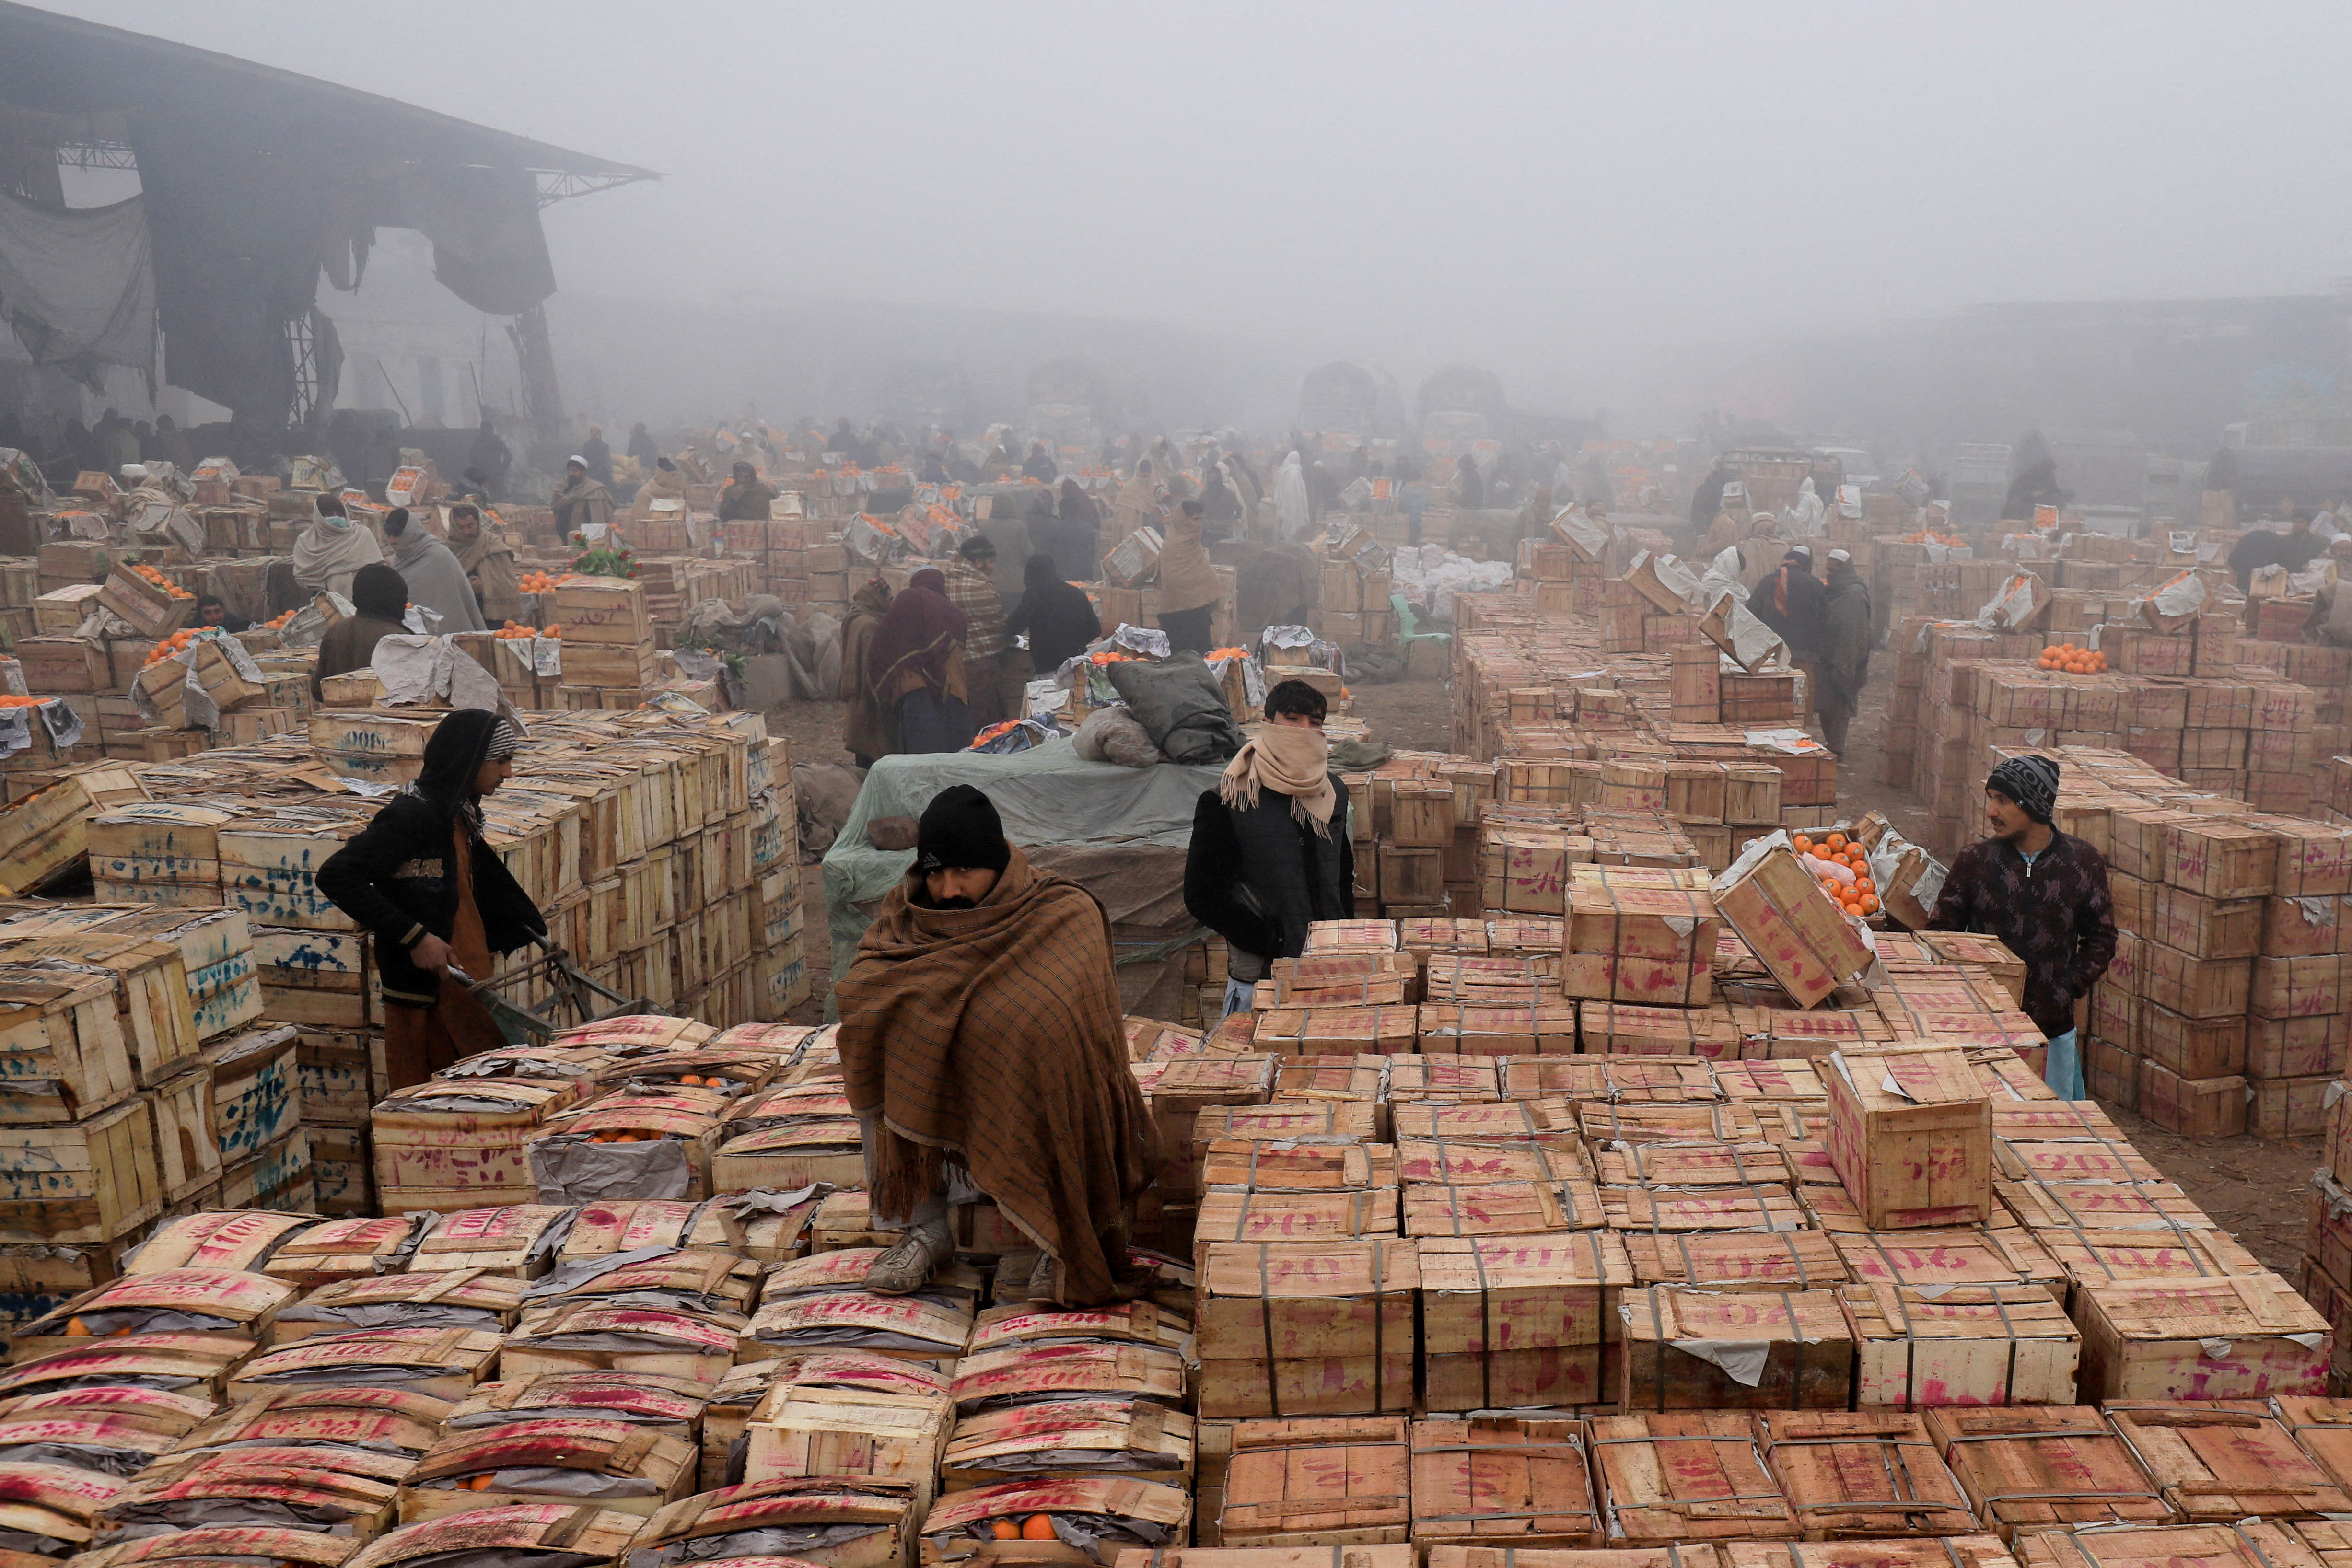 People cover themselves to stay warm during heavy fog, early in the morning at the fruit wholesale market on the outskirts of Peshawarr